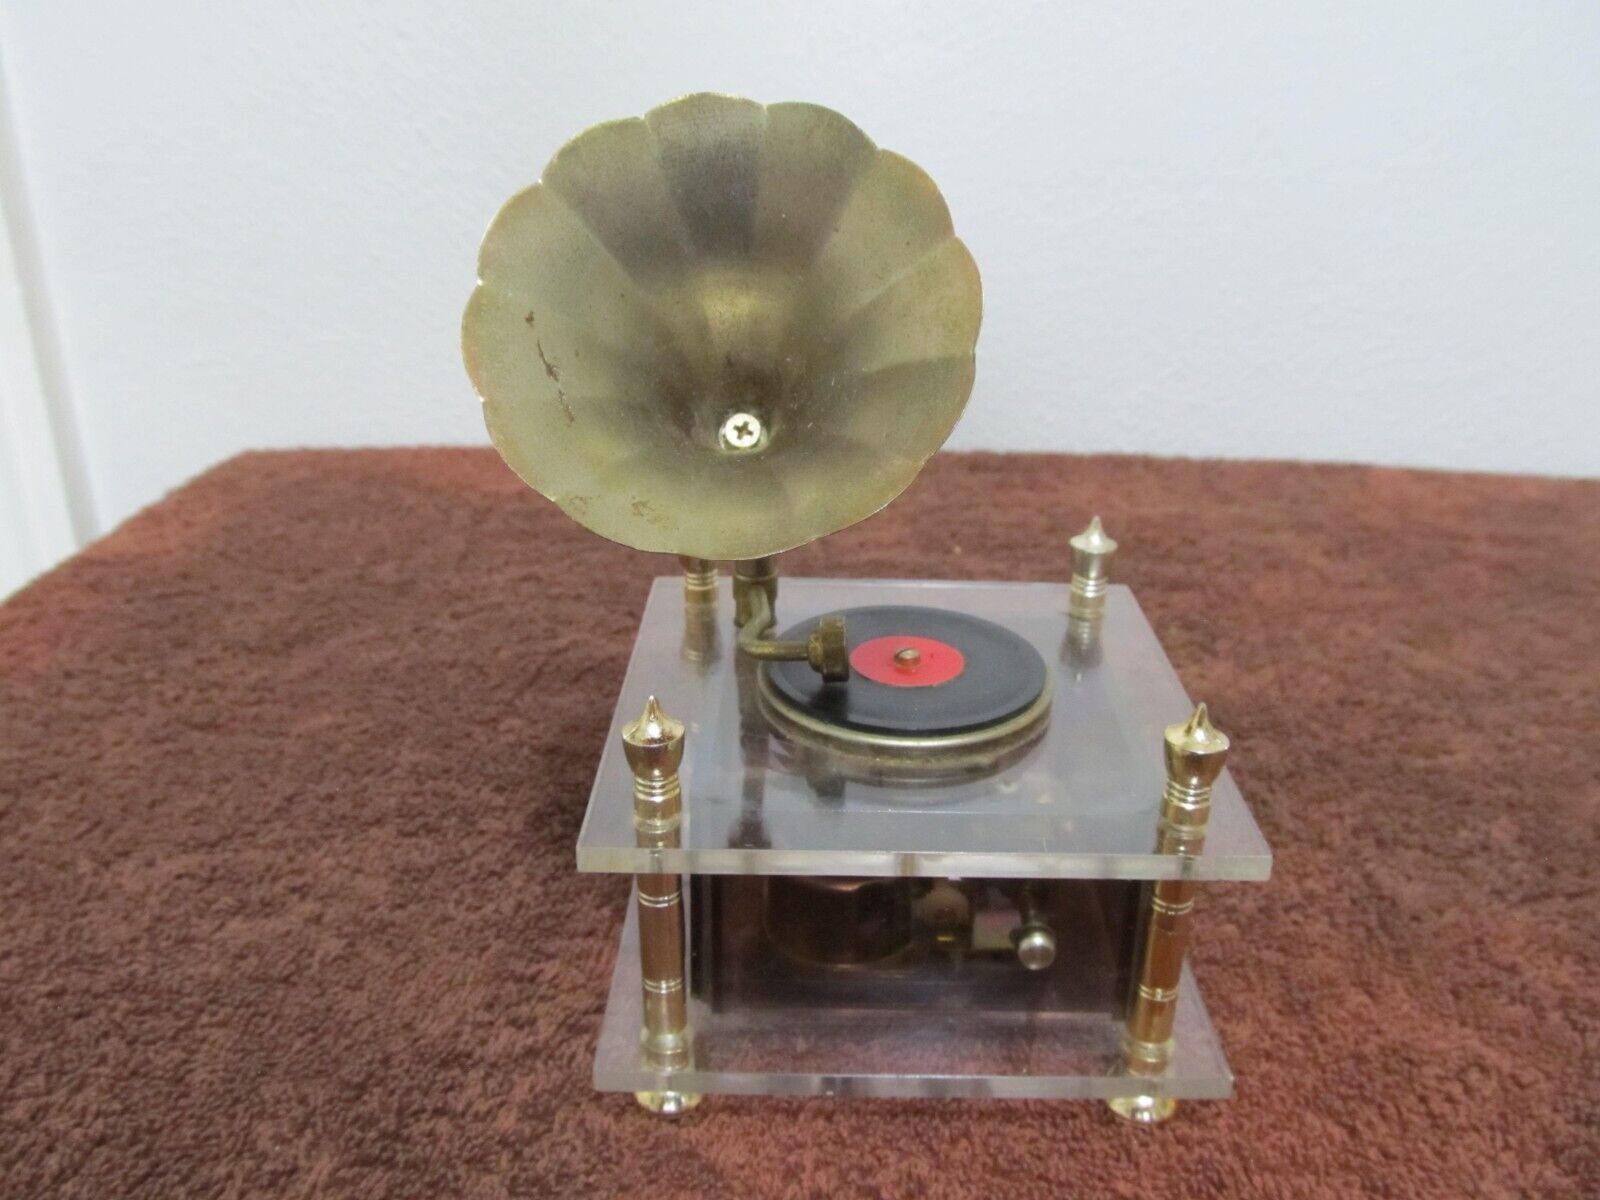 VINTAGE PHONOGRAPH RECORD PLAYER WIND-UP MUSIC BOX - PLAYS \